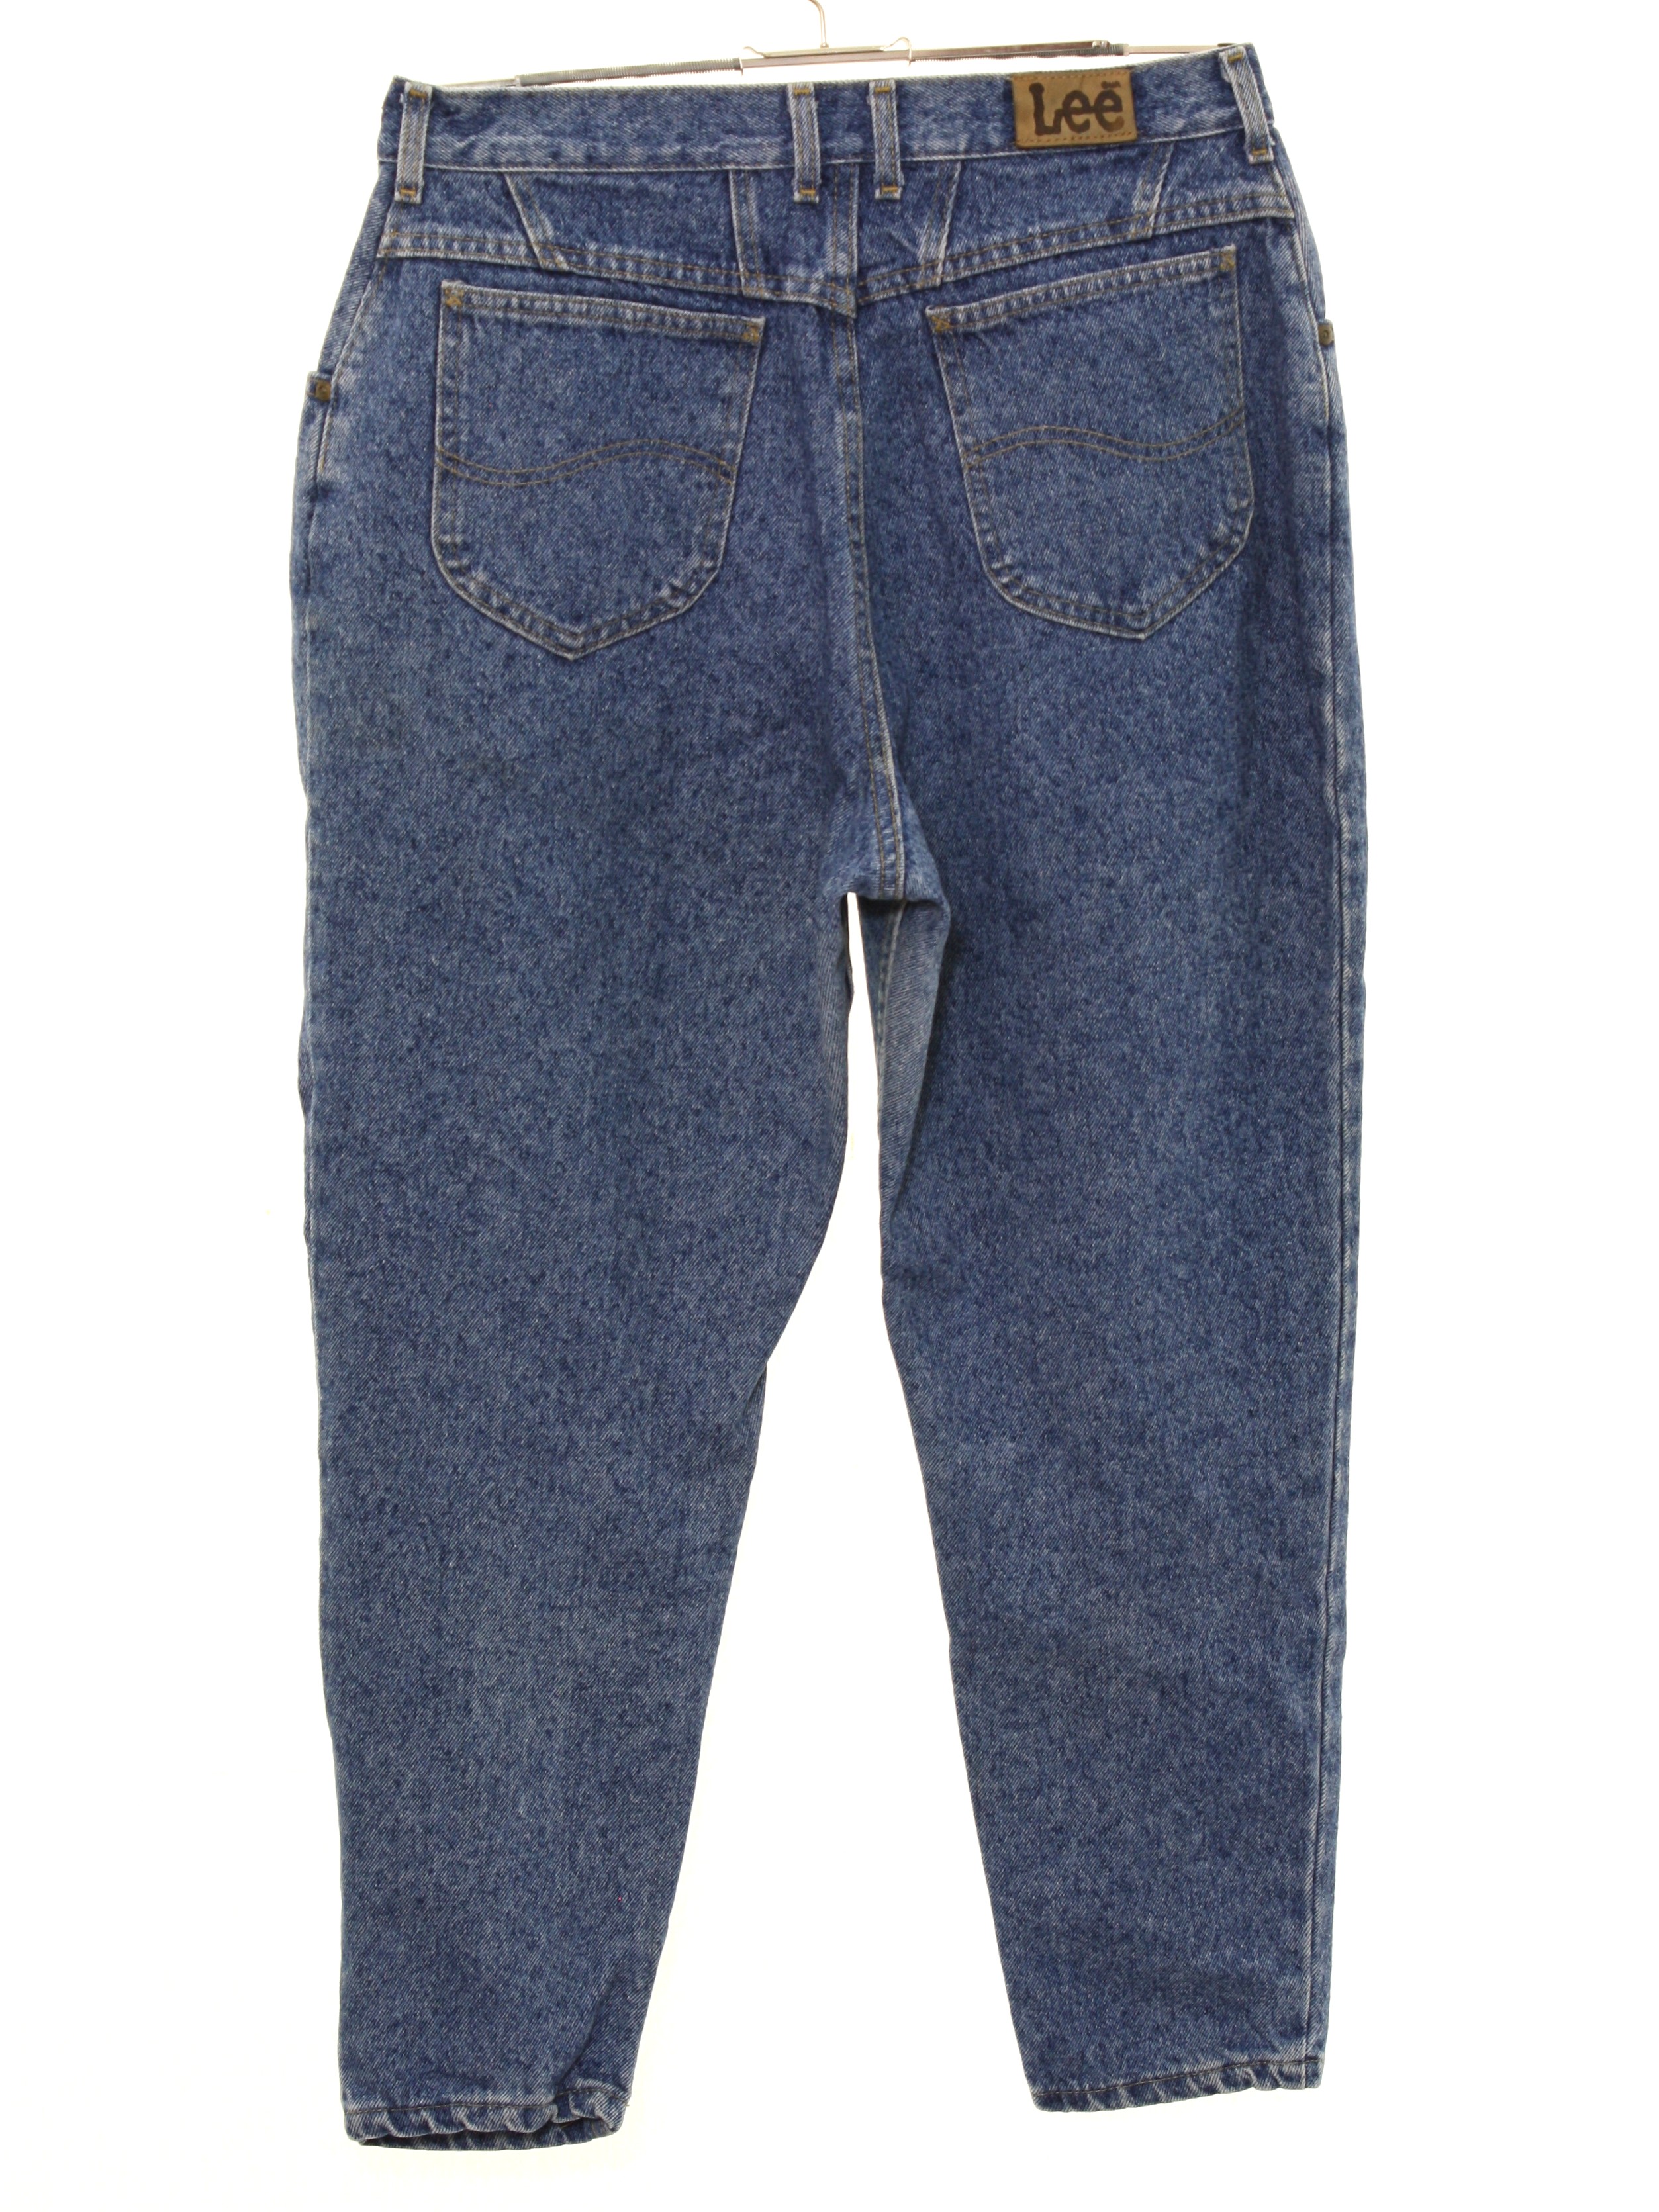 women's stone washed jeans